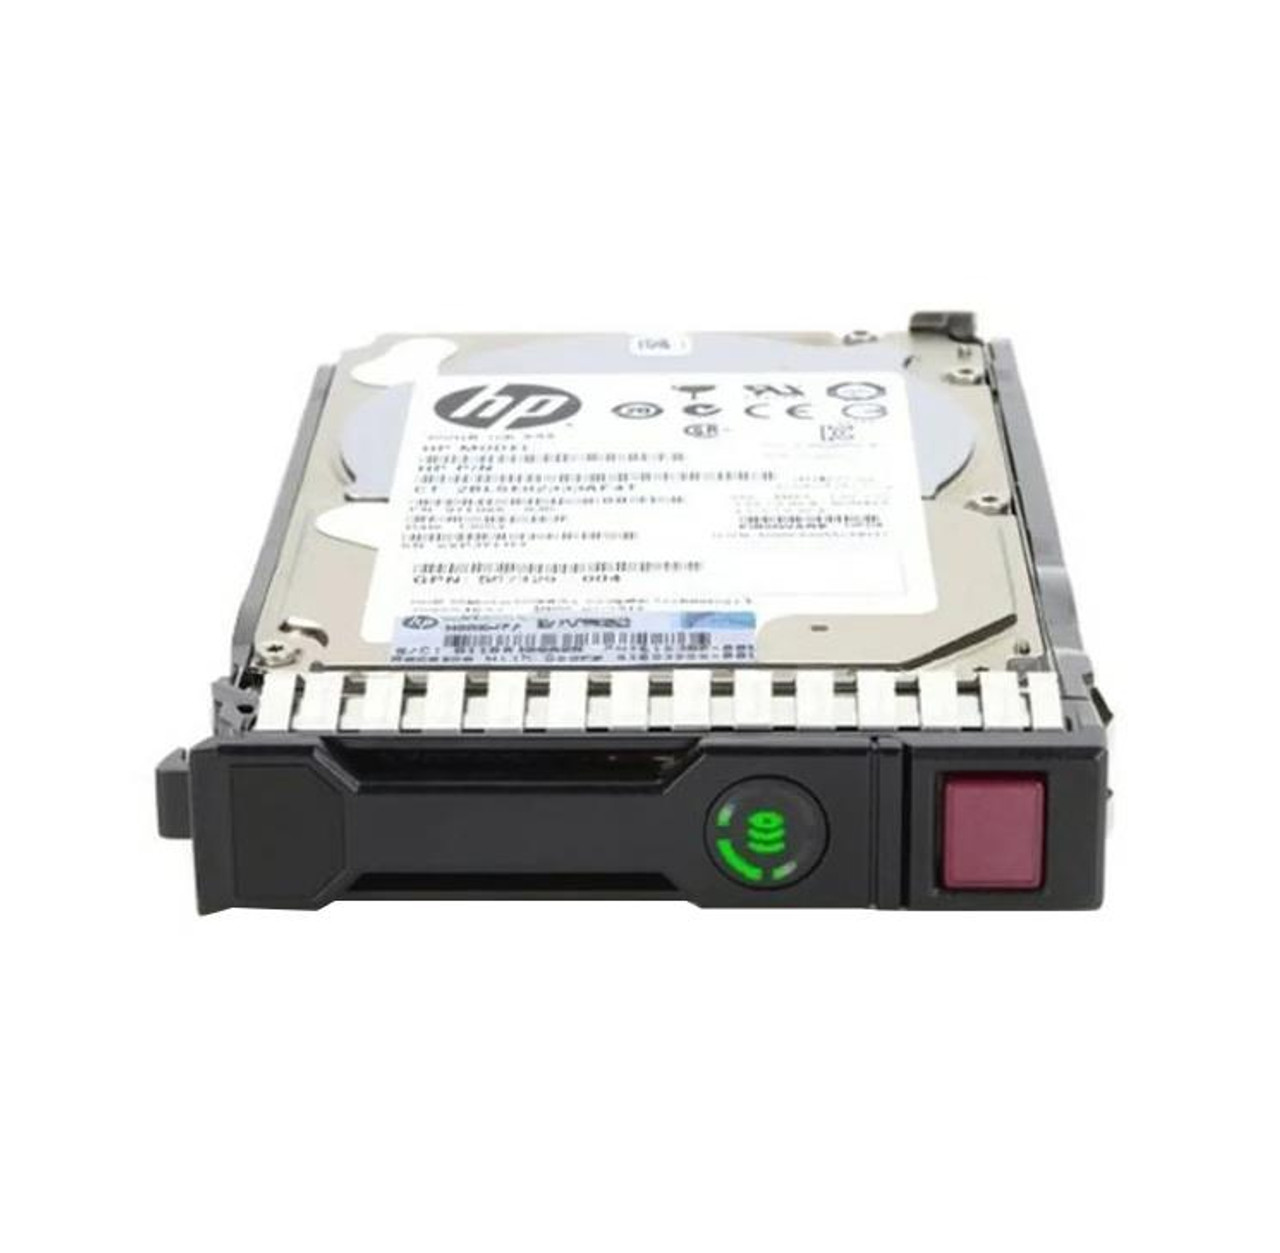 HPE 6.4TB SAS 12Gbps Hot Swap Mixed Use 2.5-inch Internal Solid State Drive (SSD) with Smart Carrier